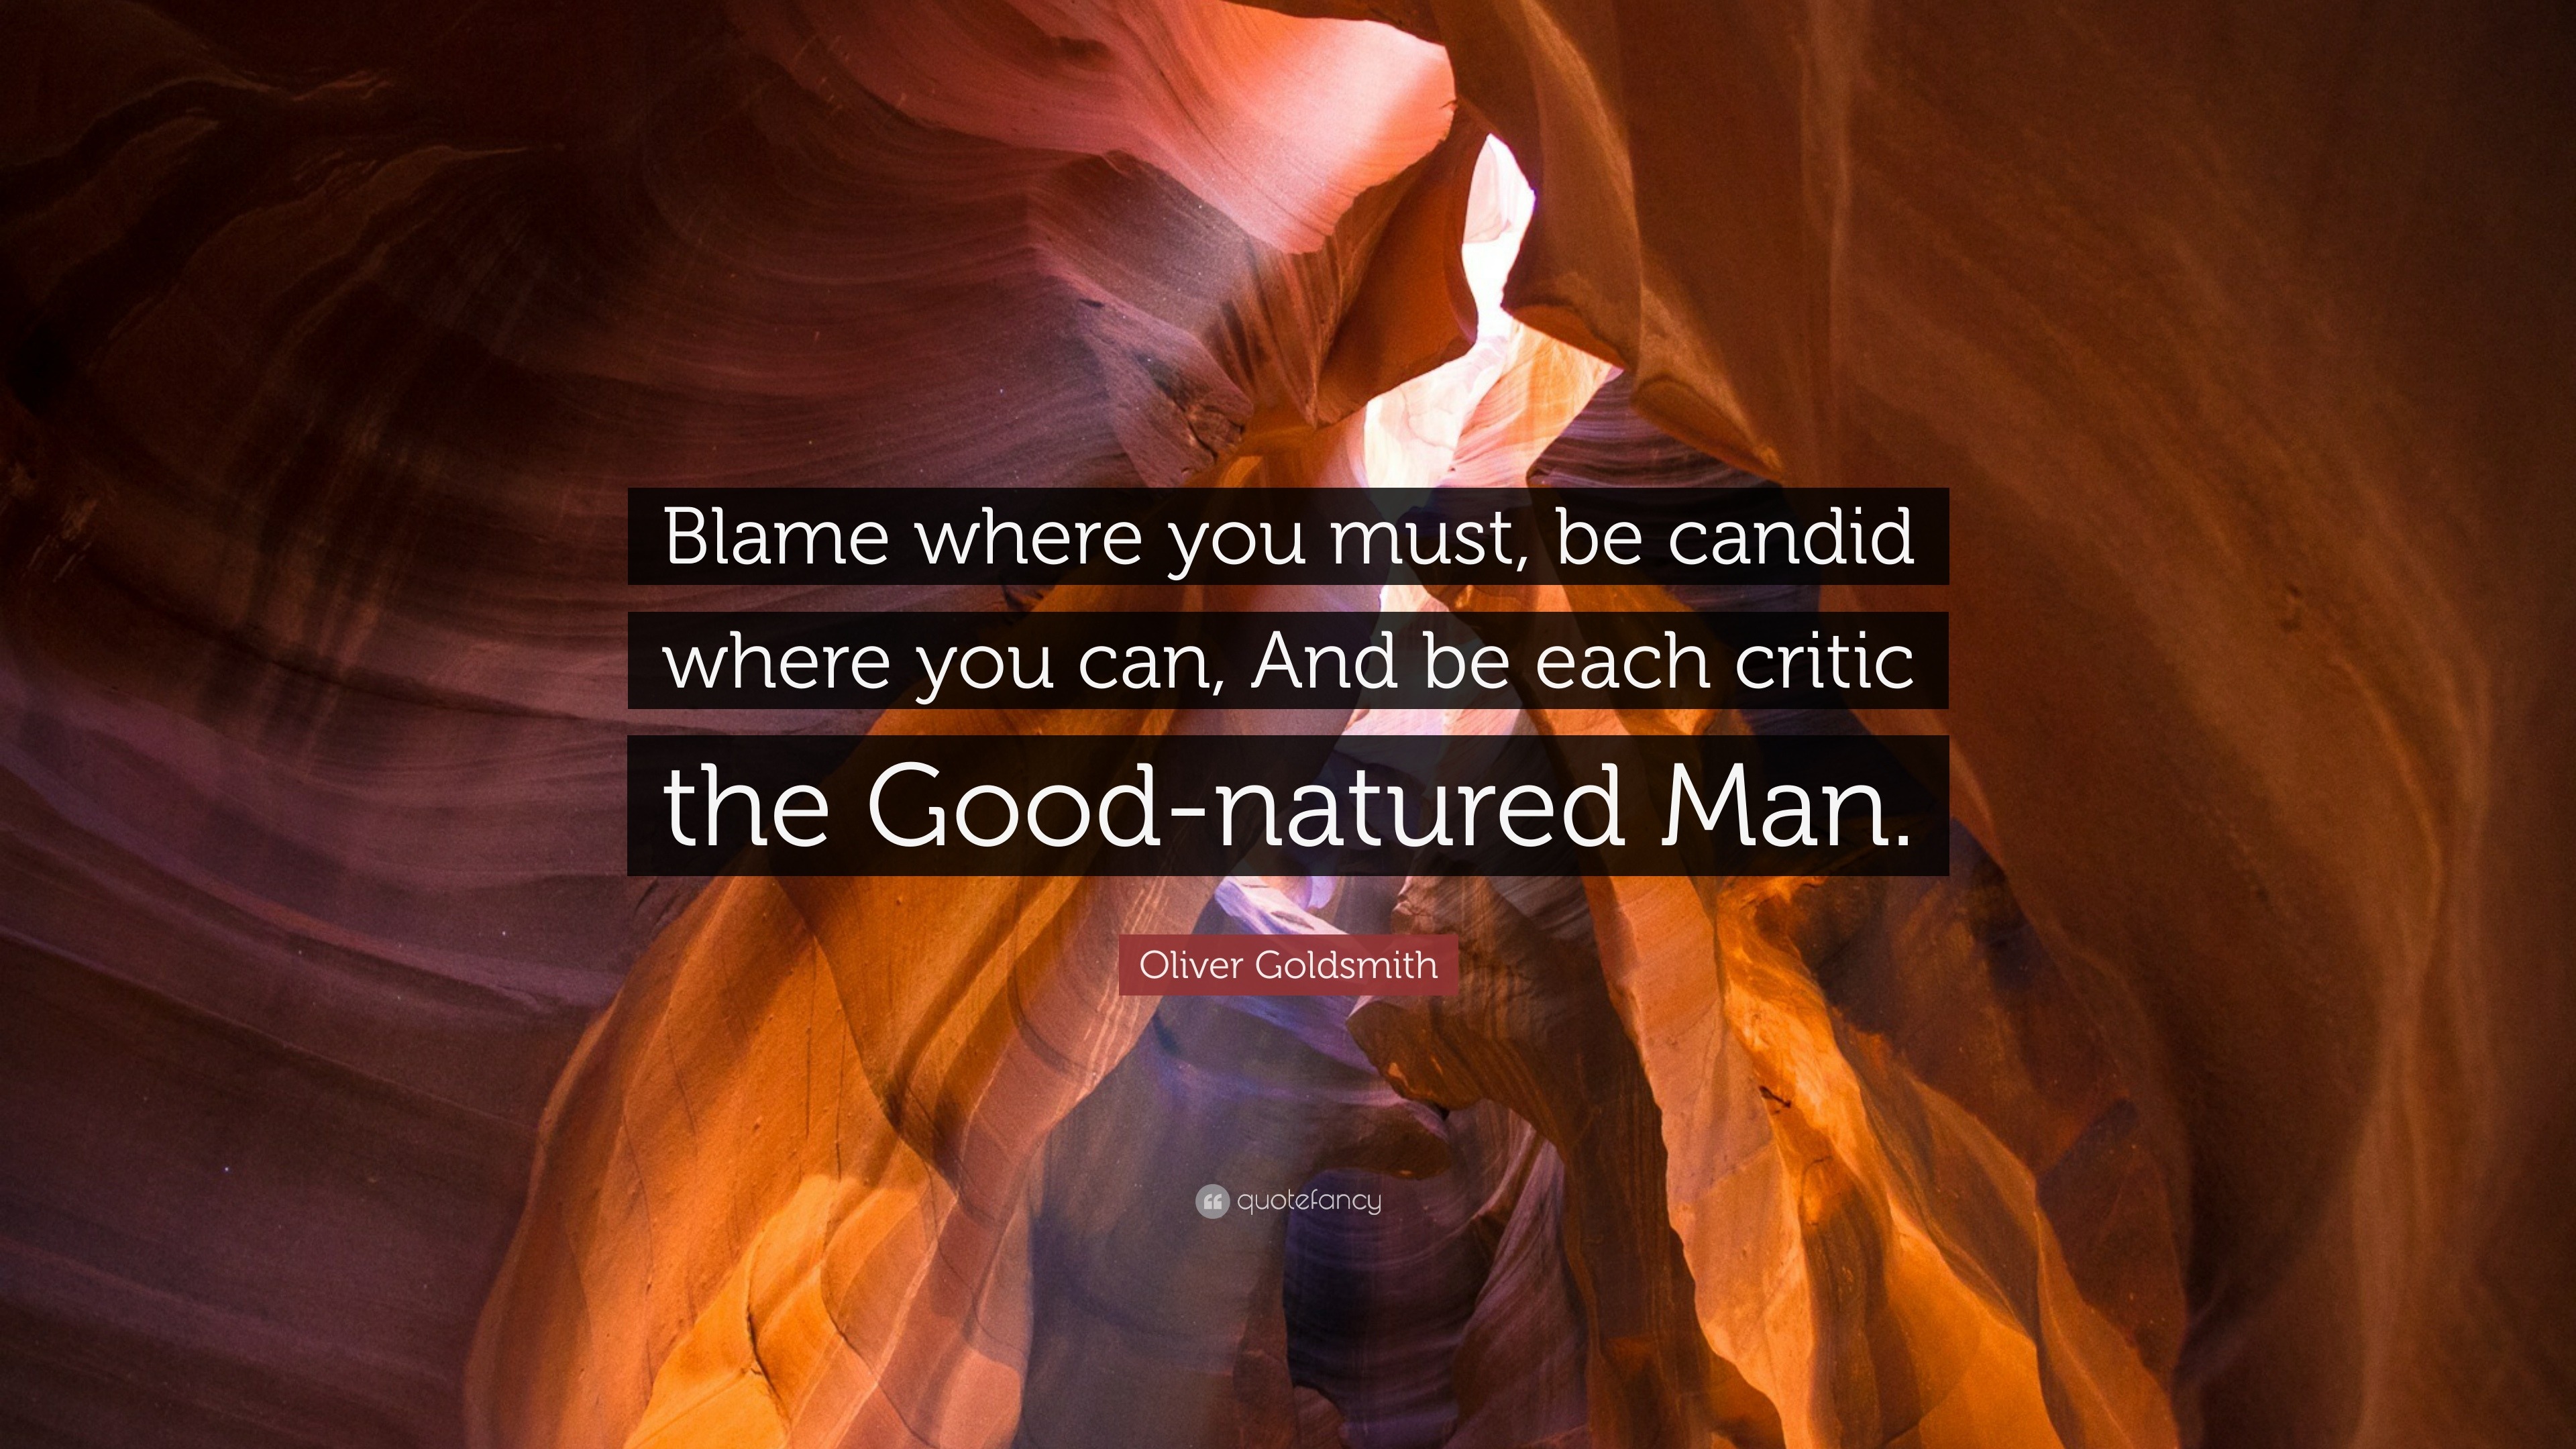 Oliver Goldsmith Quote: “Blame where you must, be candid where you